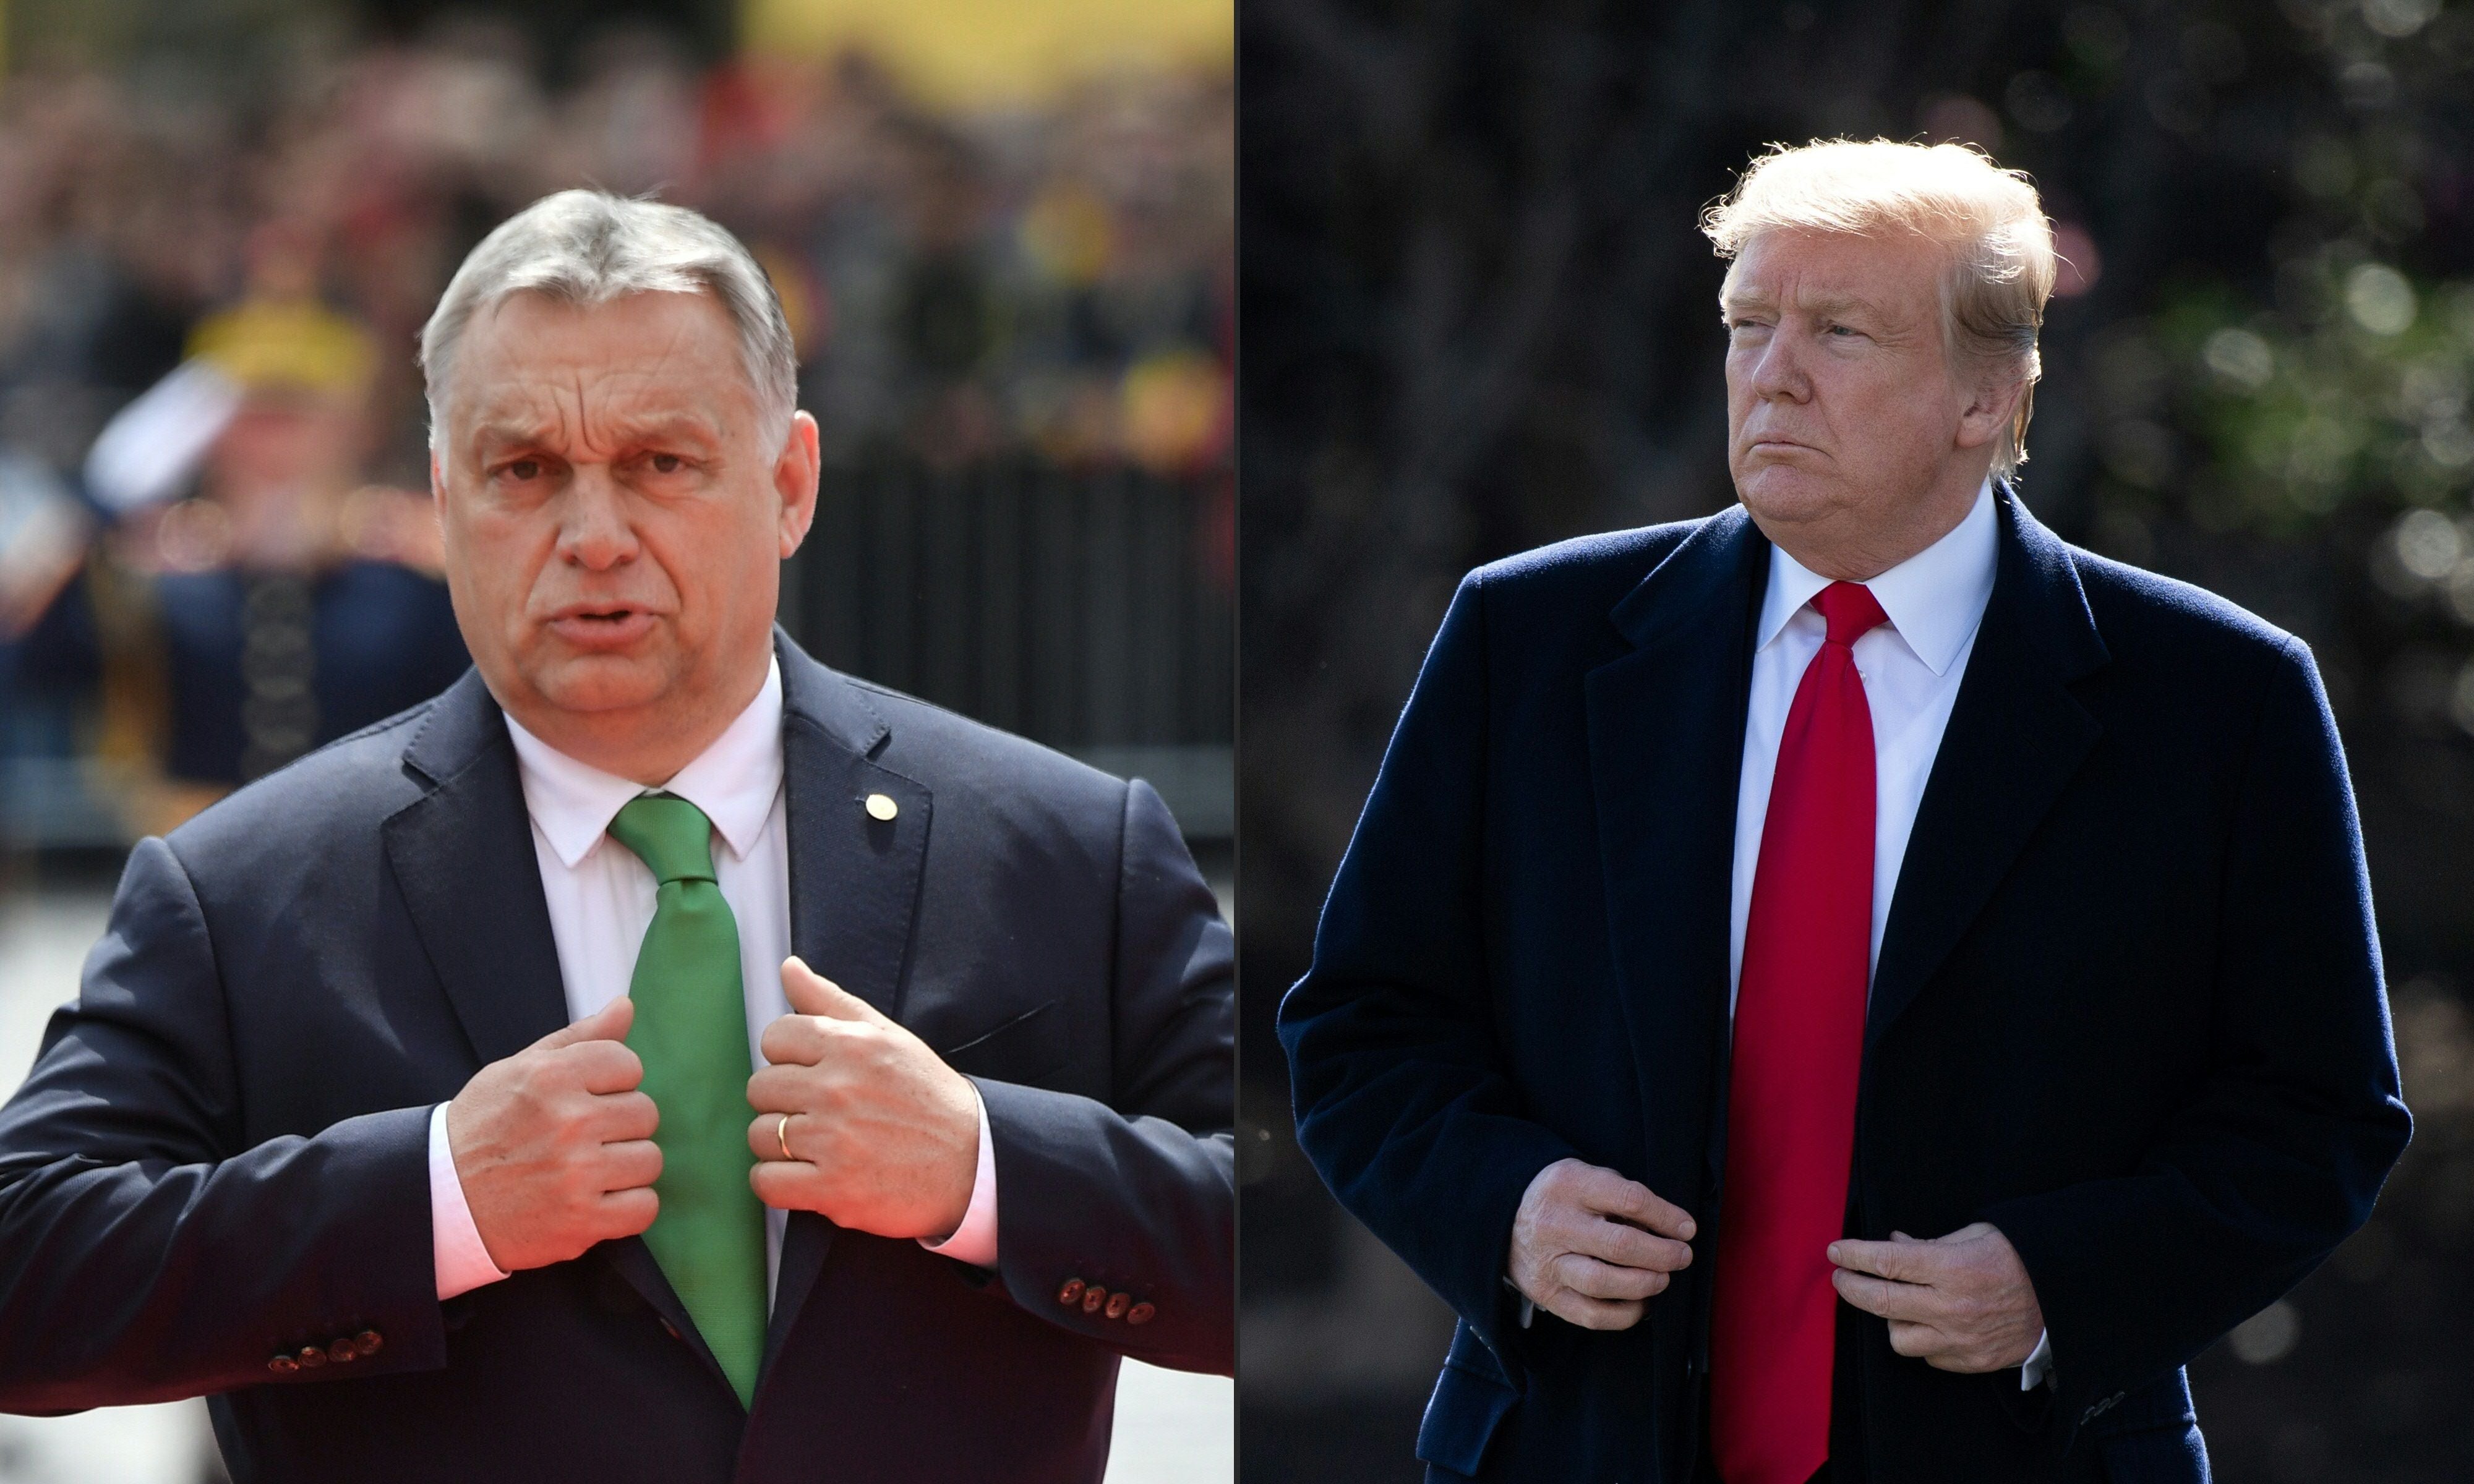 Donald Trump endorsed Victor Orbán for re-election last month